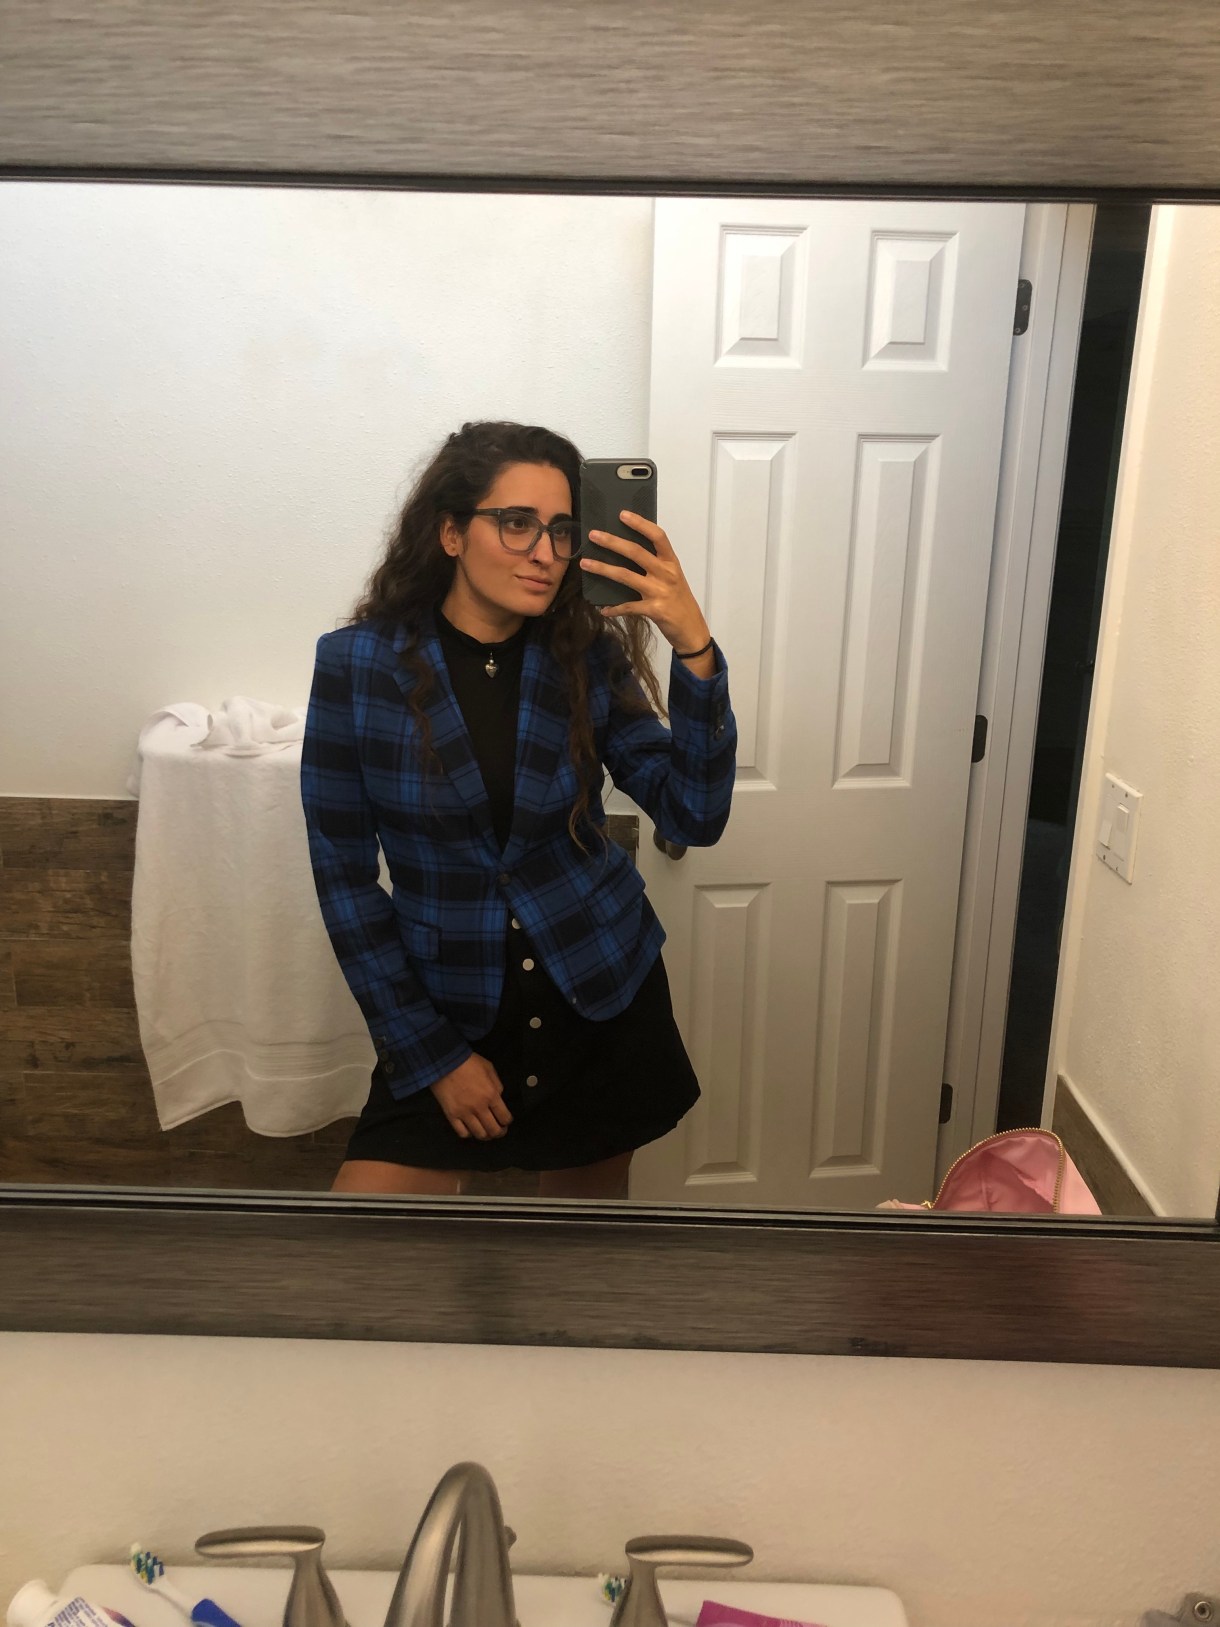 Kayla wears a black miniskirt and black turtleneck tank top with a blue and black plaid blazer that is buttoned. She's taking a mirror selfie.